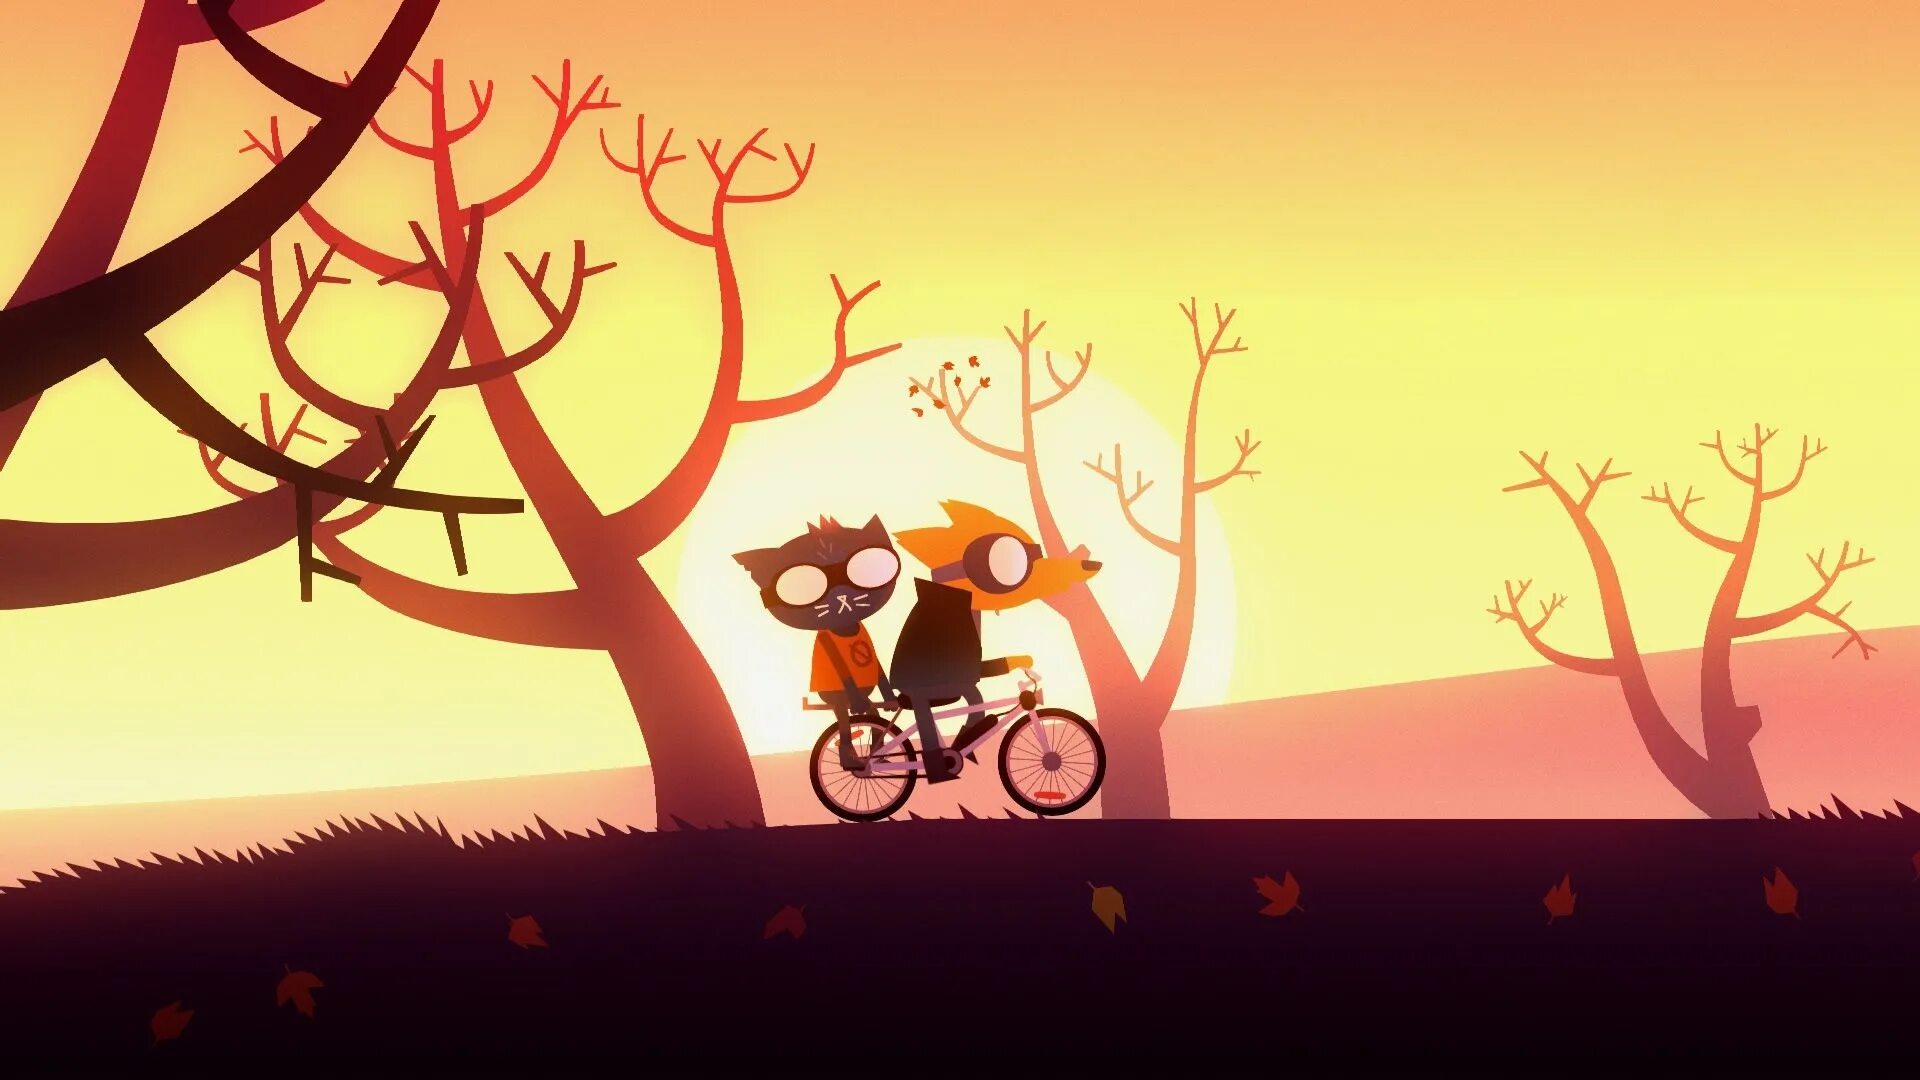 They in this town. Night in the Woods. Night in the Woods игра. Night in the Woods фон. Обои инди КИД.